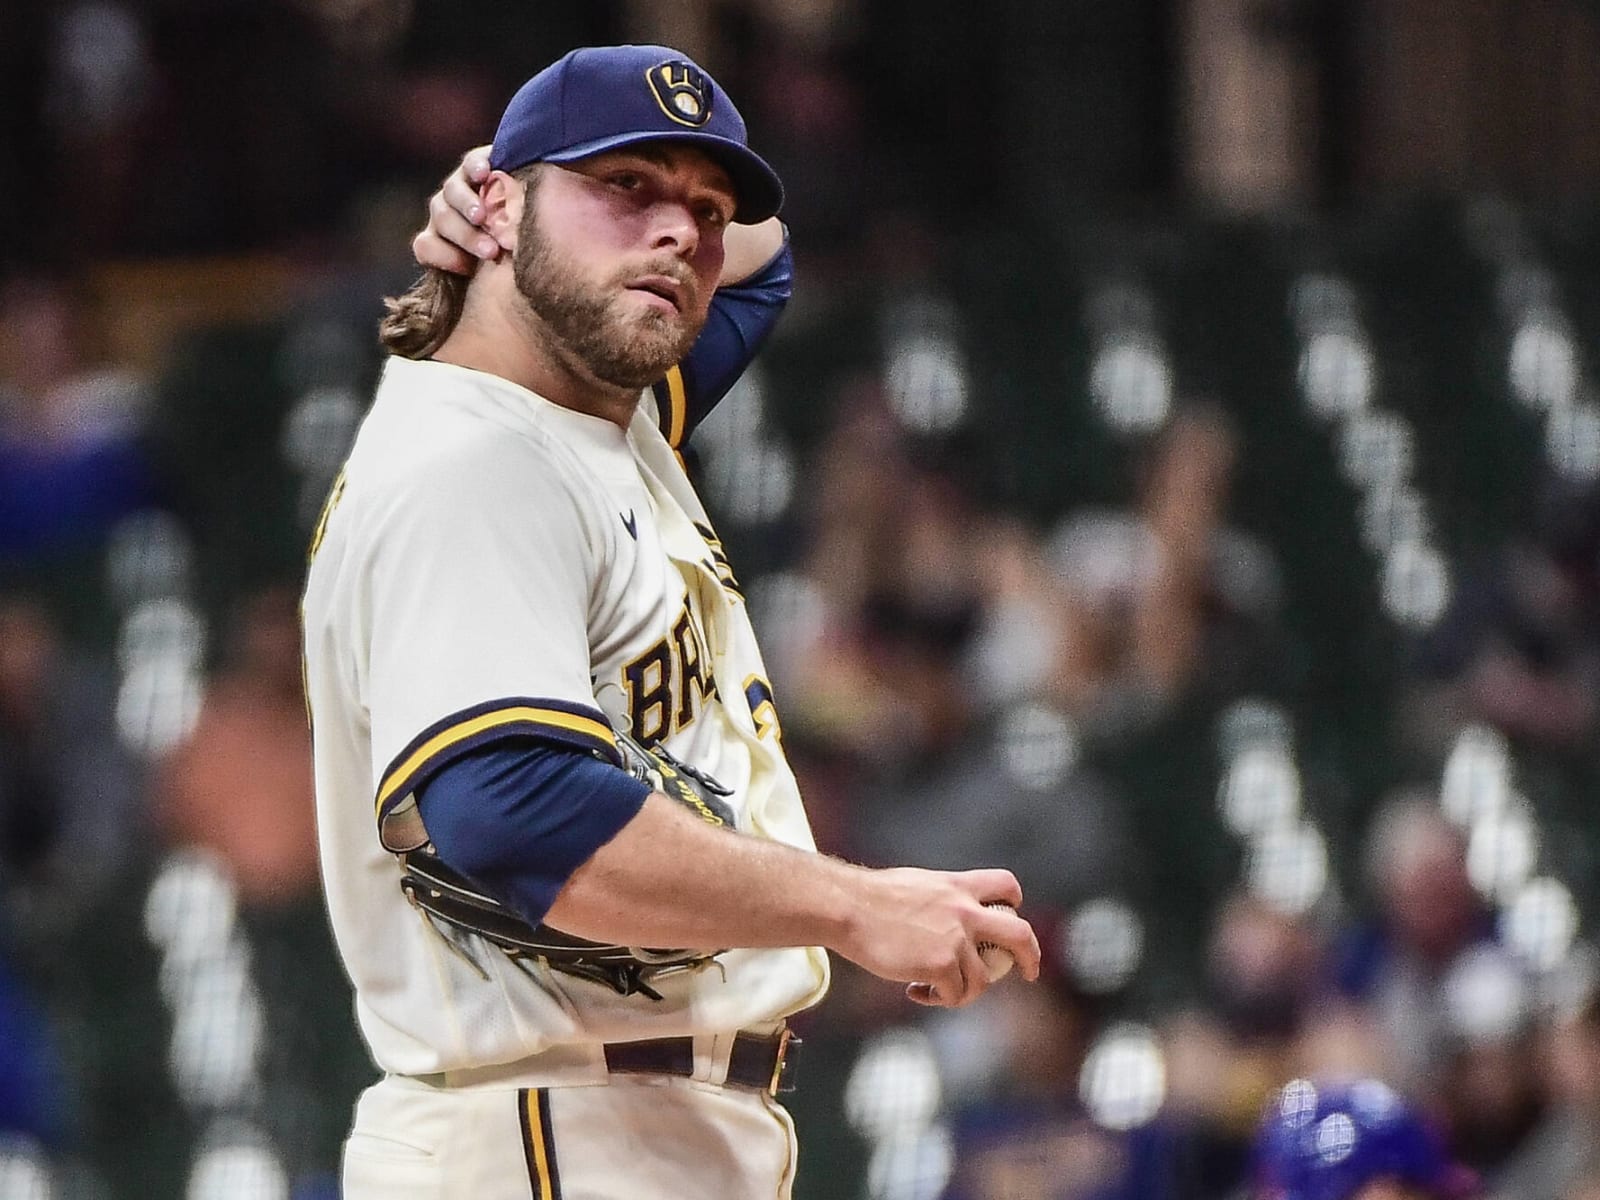 Brewers ace has concerning quote about relationship with team